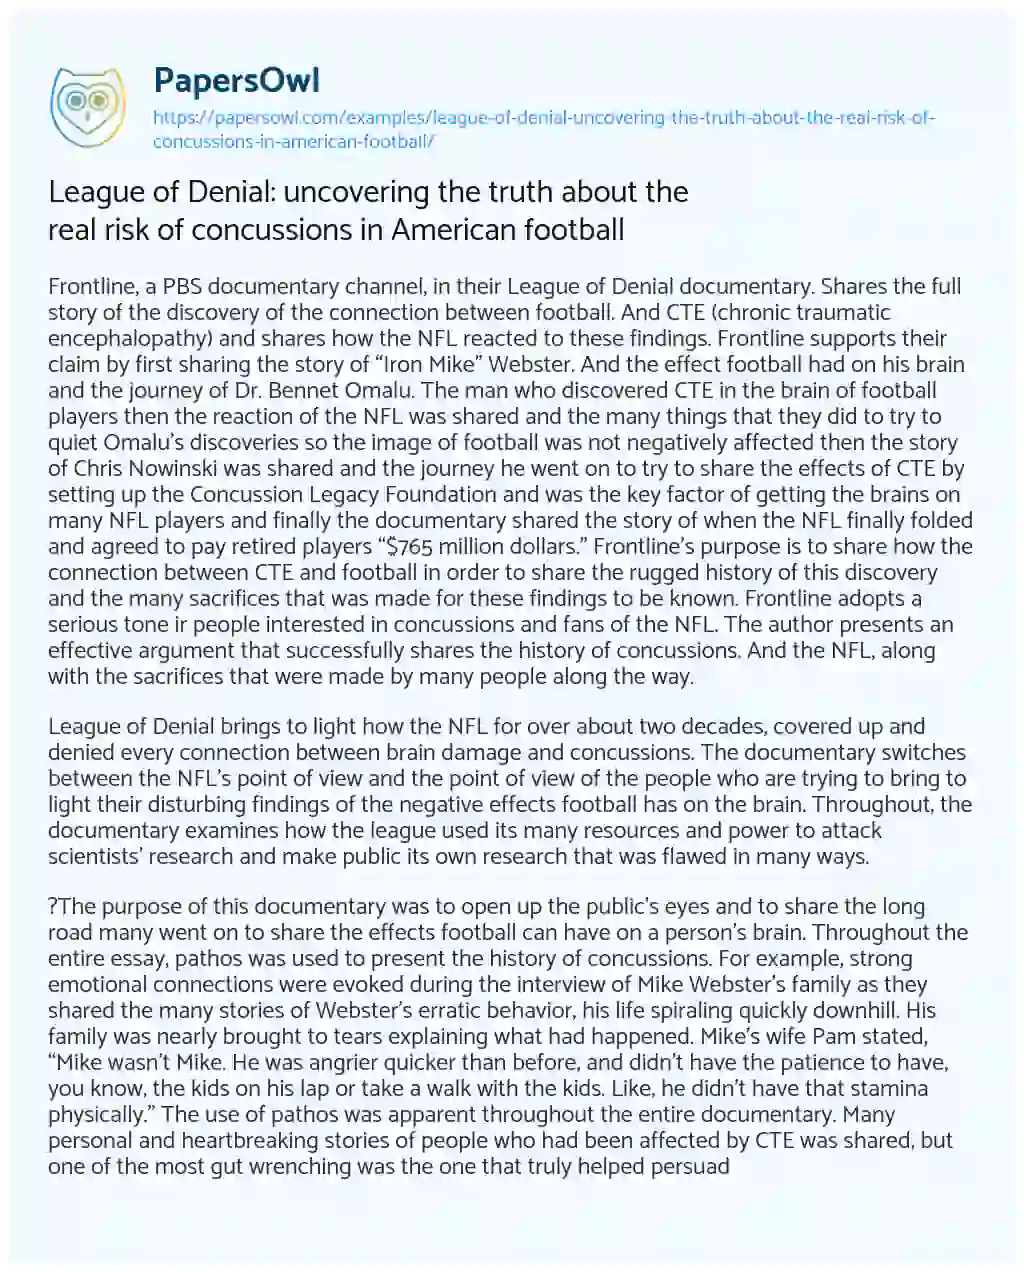 Essay on League of Denial: Uncovering the Truth about the Real Risk of Concussions in American Football